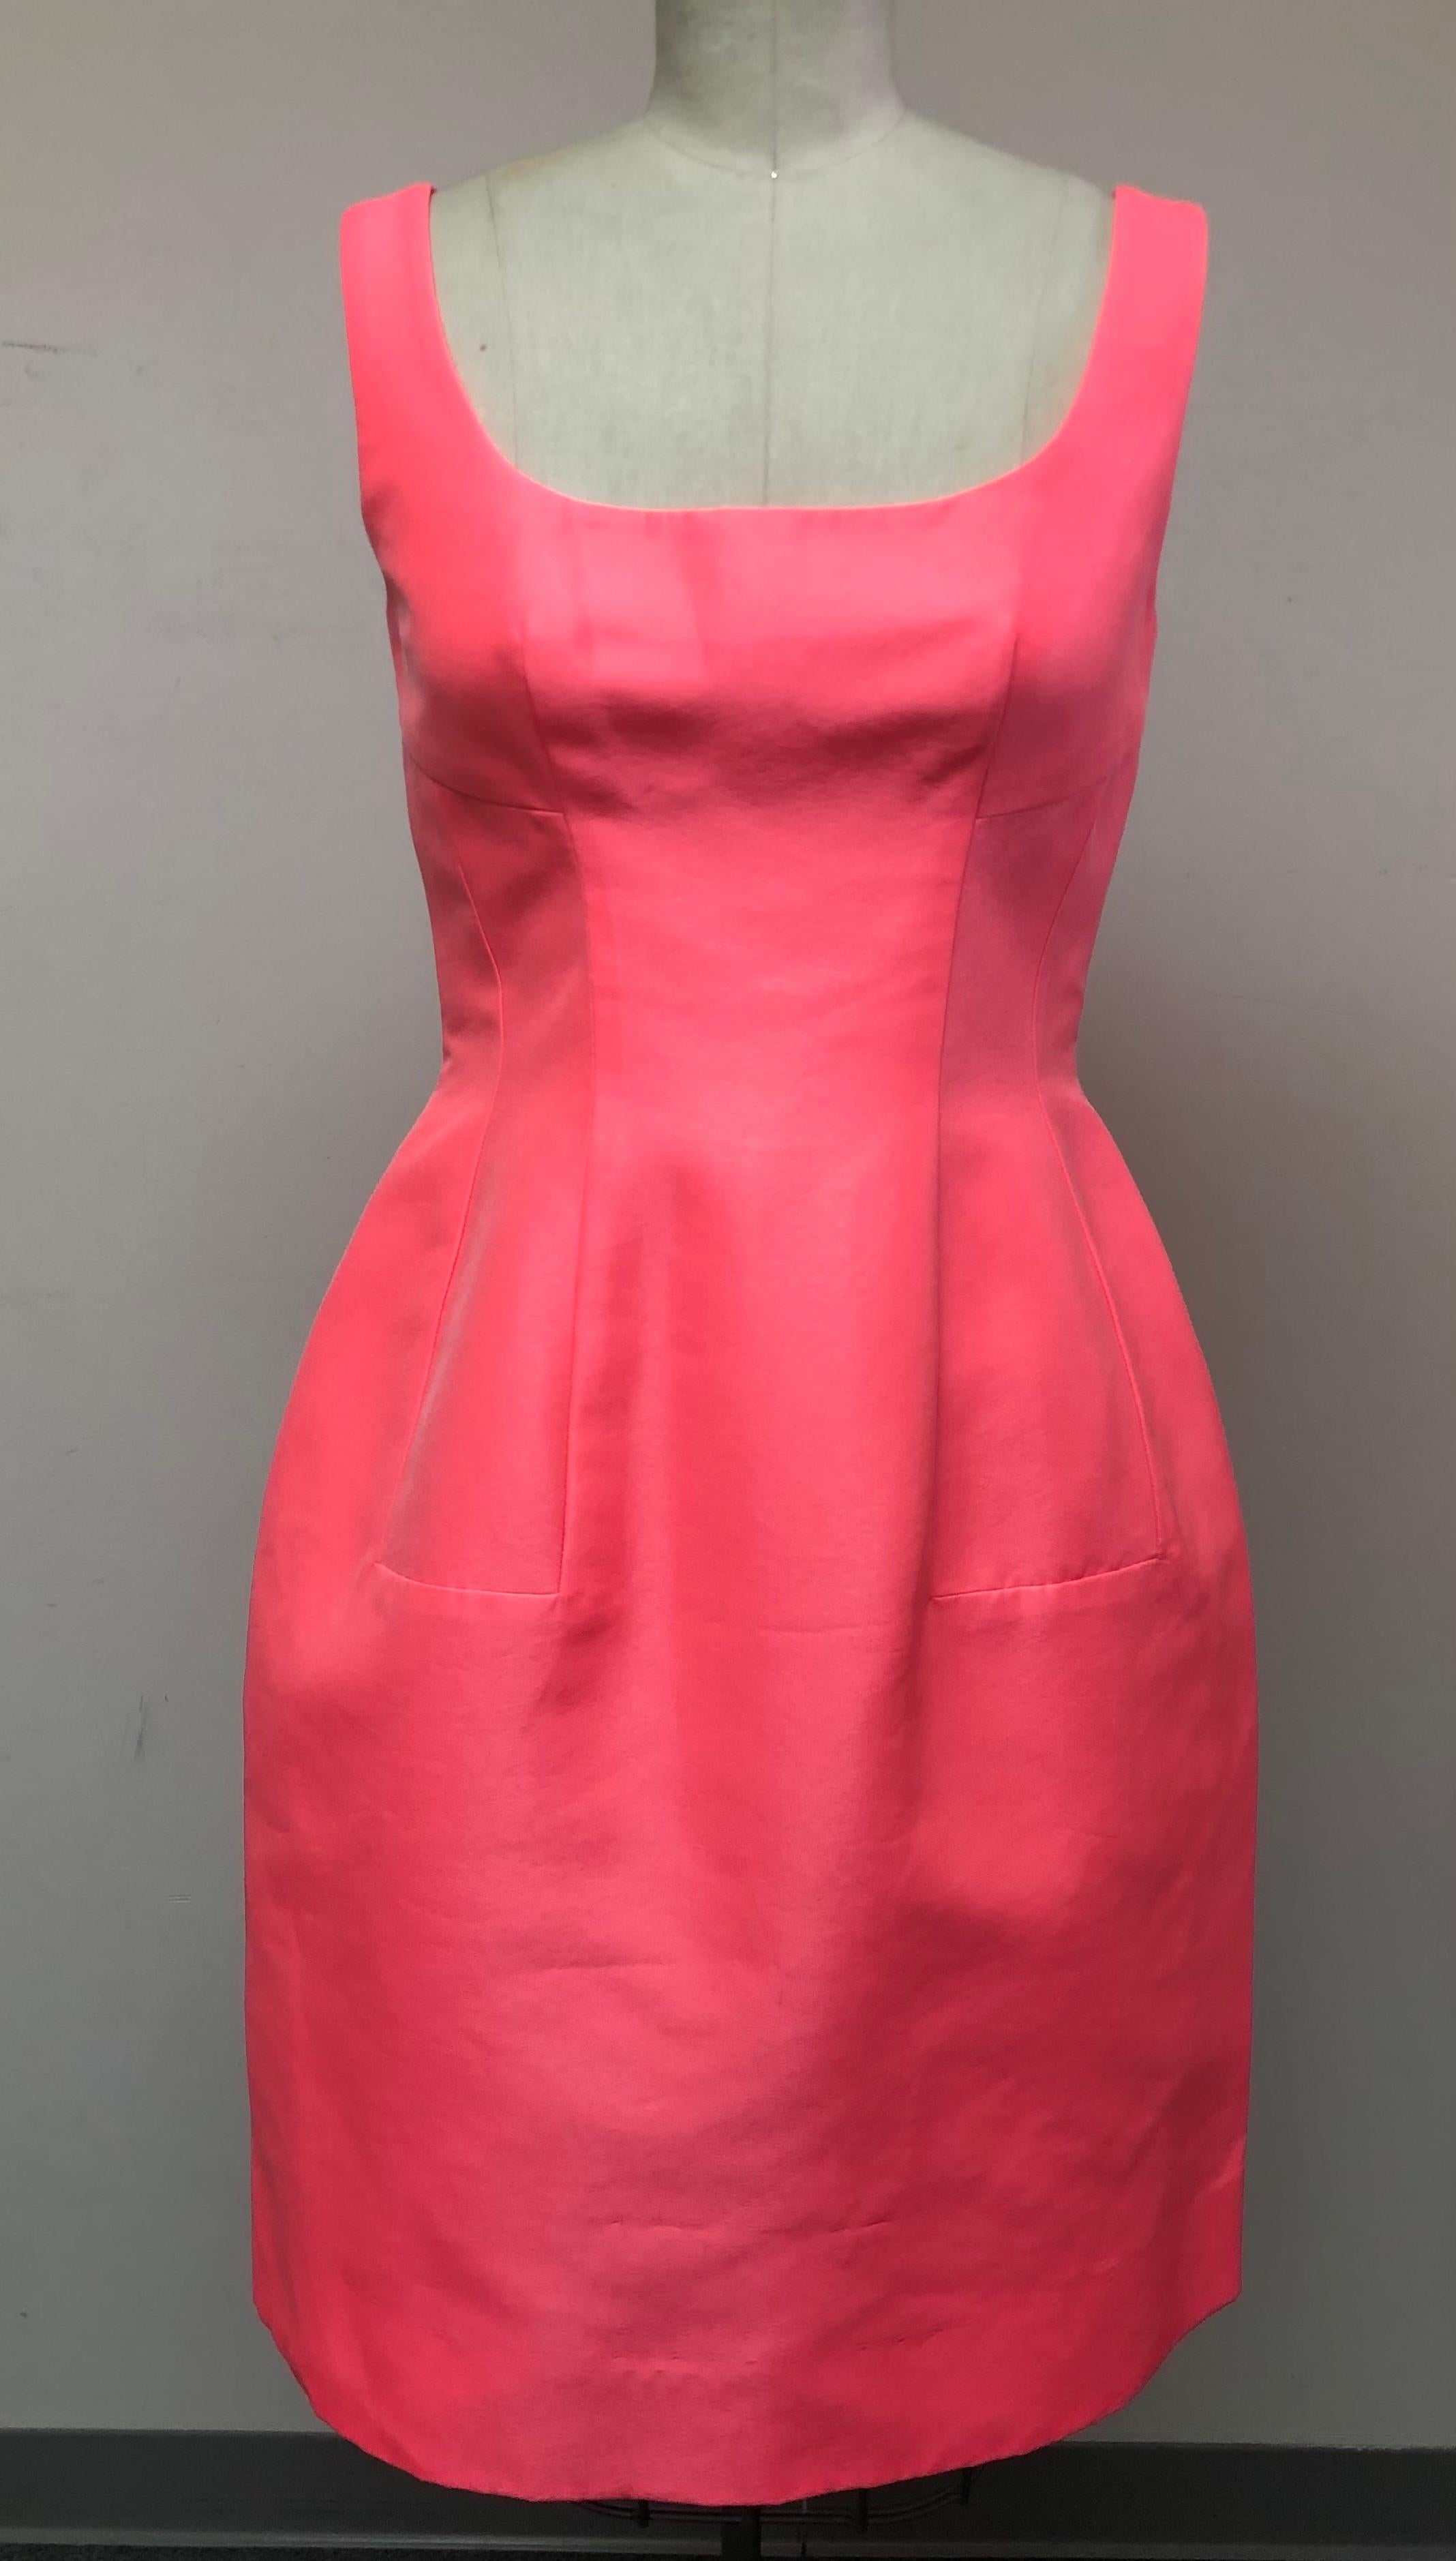 The Color of this Dress is Sublime. Shocking Pink Silk from Italy. Sleeveless with scoop neckline. The skirt has a lovely fullness with 
insets giving it a unique look.
Worn for cocktails or out to dinner on a summery night or as a wedding guest.